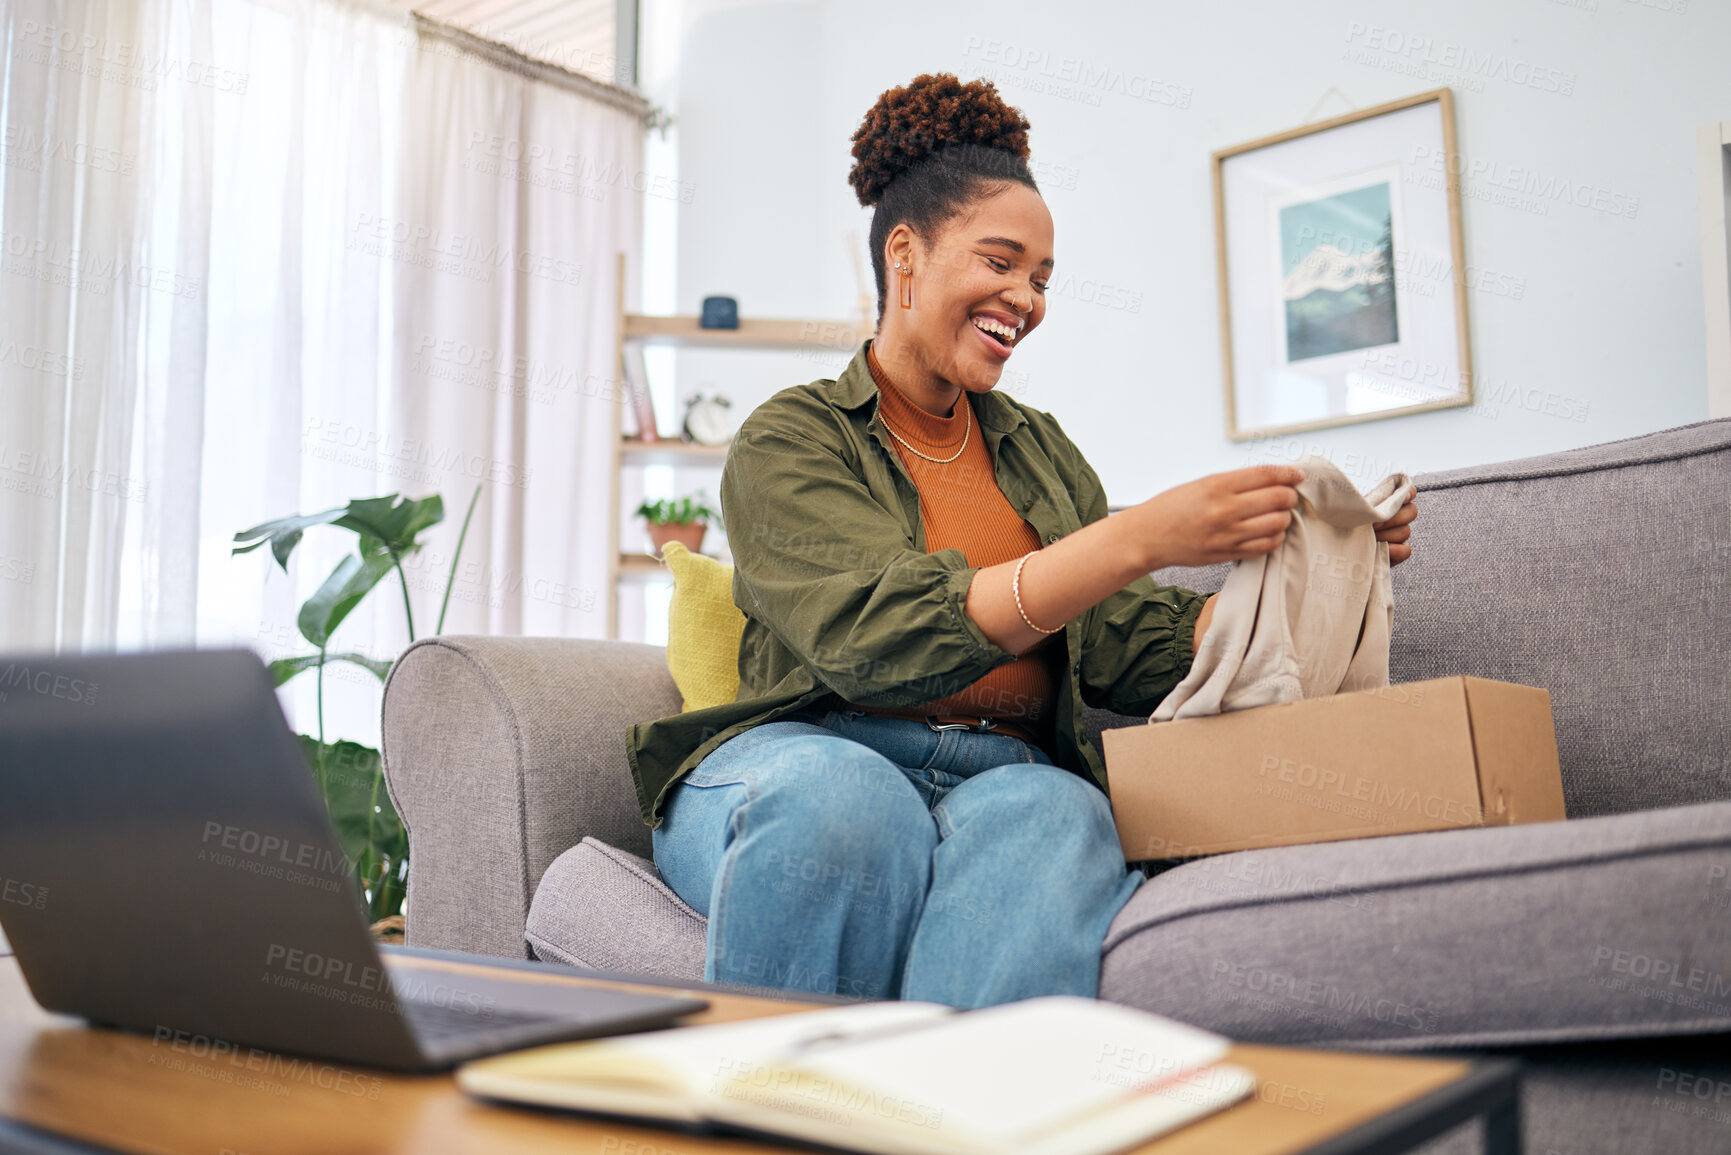 Buy stock photo Online shopping, woman on sofa with package and smile, discount fashion retail and laptop in living room. Delivery of clothes, ecommerce and happy person on couch with box from website sale or deal.